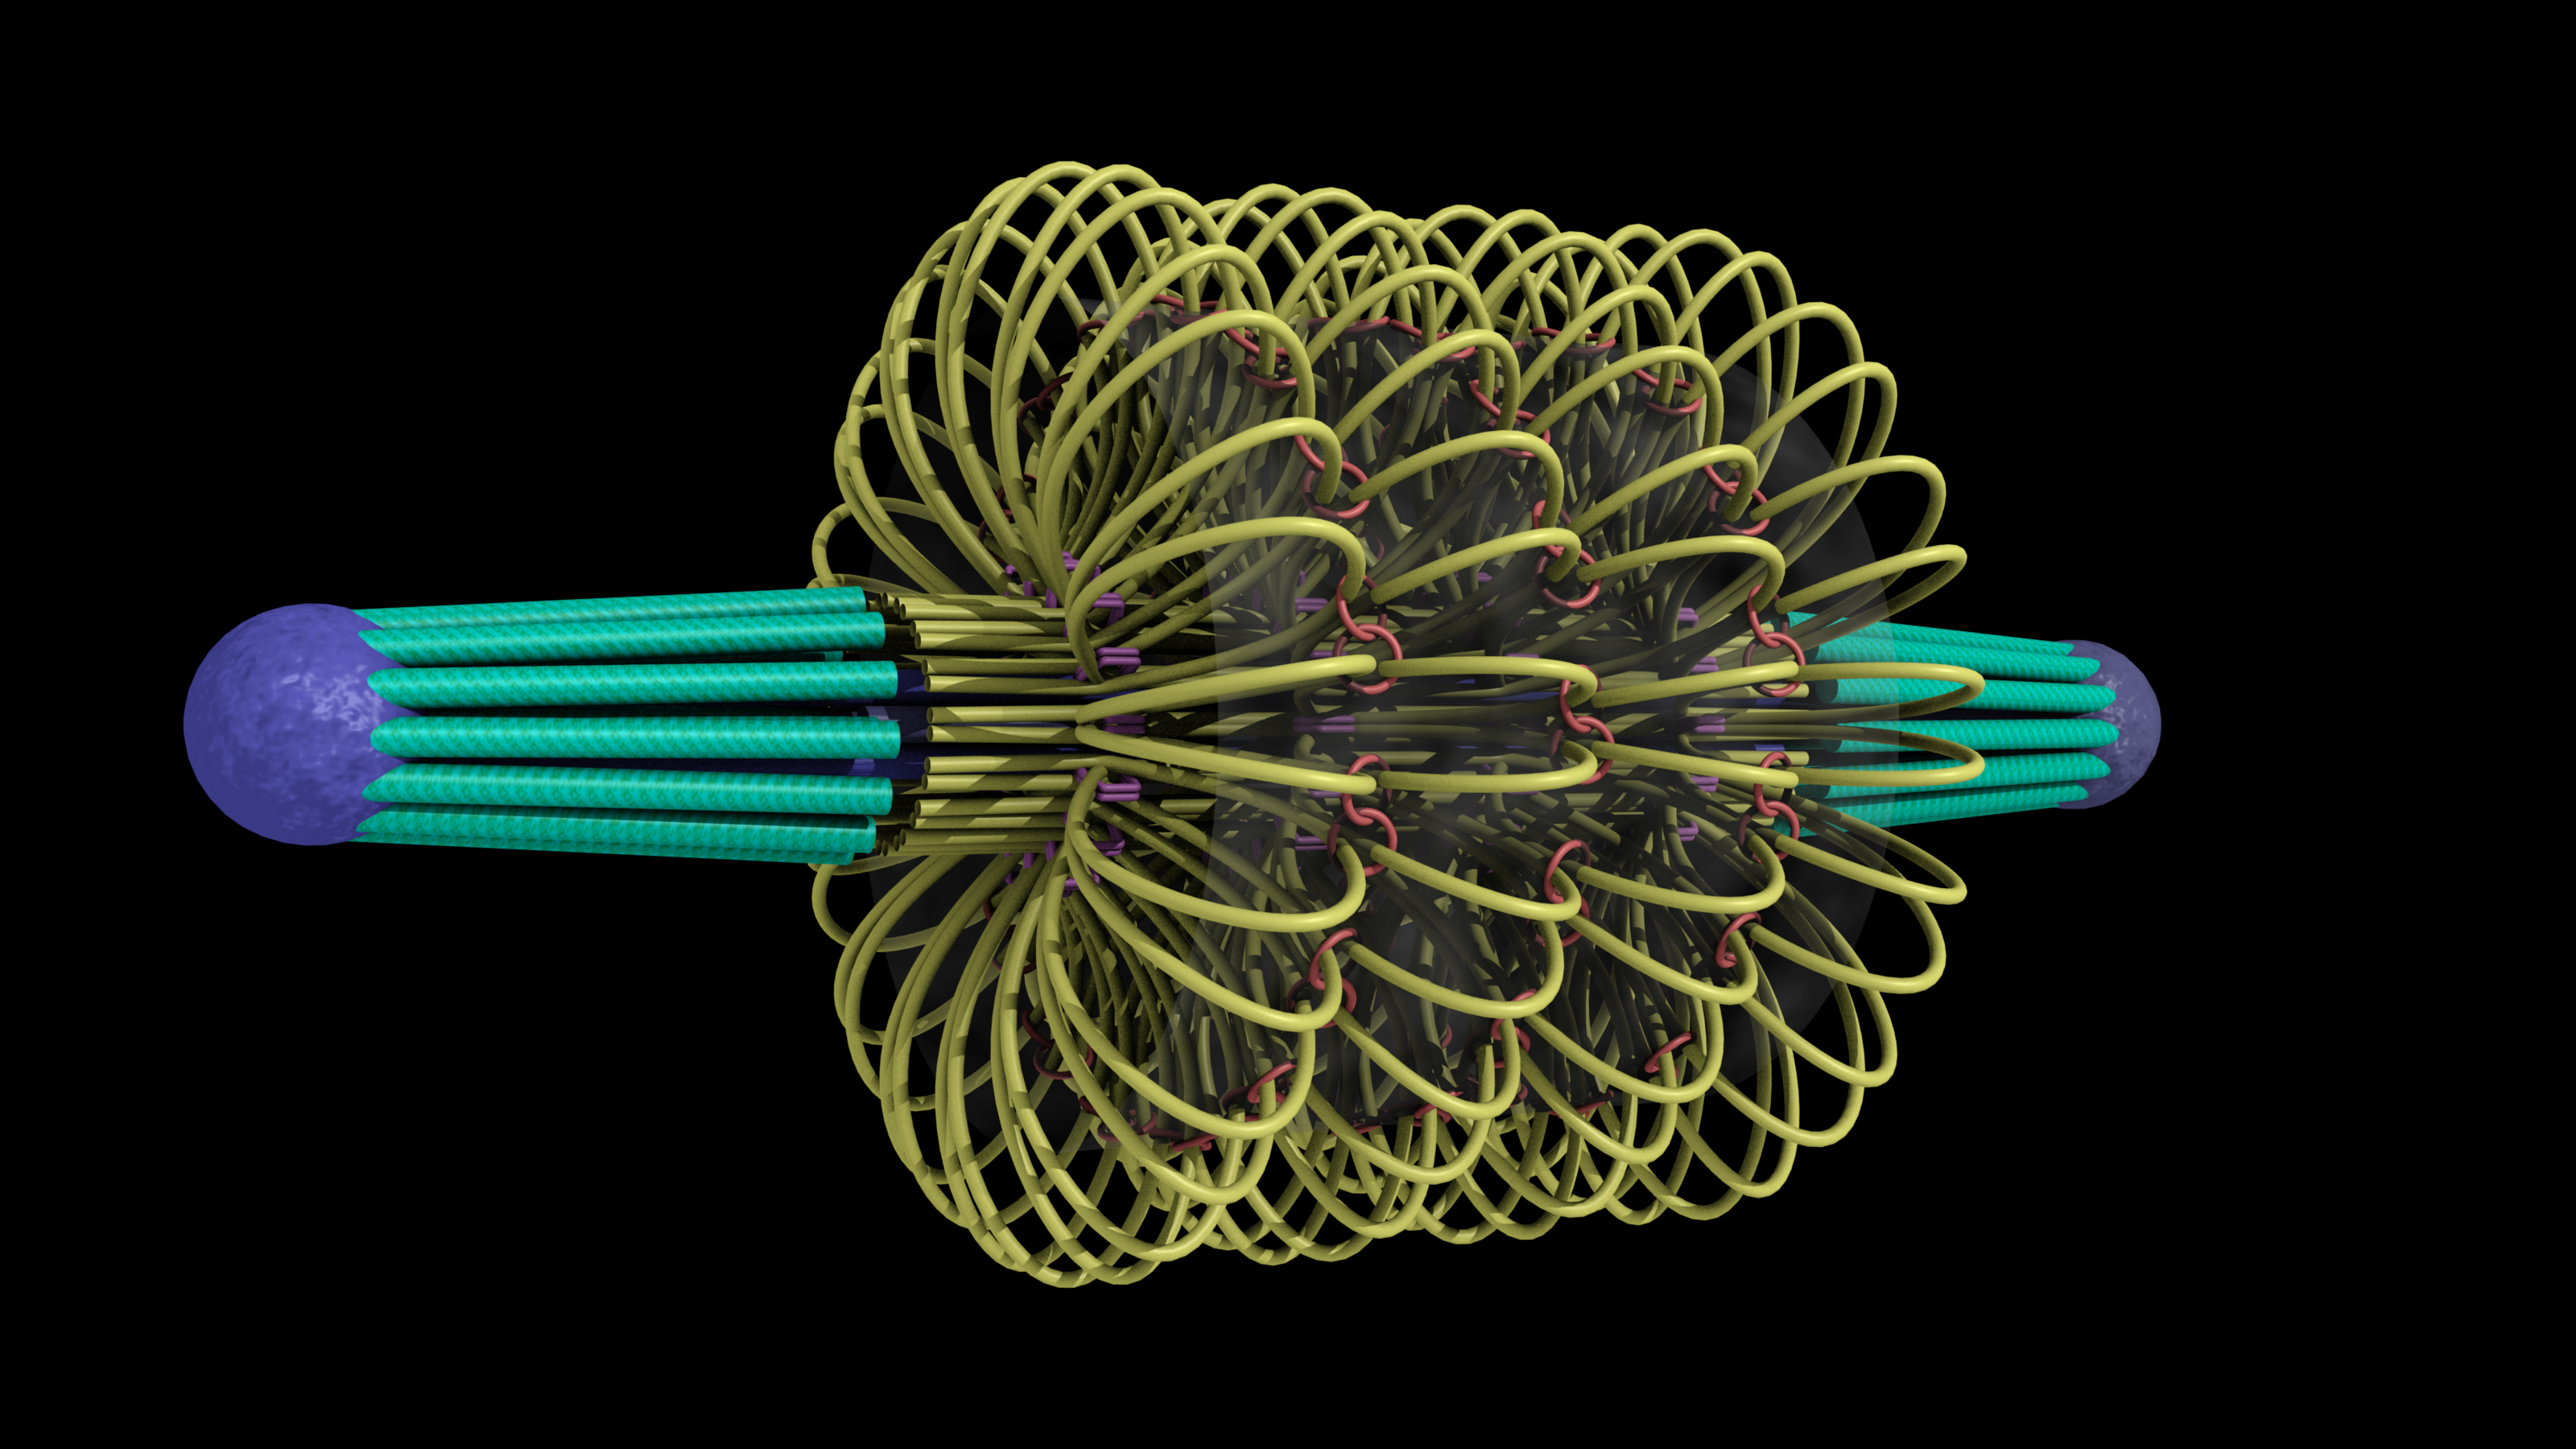 This drawing shows the spindle from end to end.  It is roughly 1.5 micons in length, with the kinetochore (green) microtubules making up 350 nm on each end, and the space between them being roughly 800 nm.  The interpolar microtubules are drawn in two shades different shades of purple (dark purple ones extend from the left end of the spindle and pink-purple ones extend from the right end of the spindle).  The microtubules are drawn straight and rigid, with an overall spindle diameter of 250 nm.   Also, the DNA strands (yellow) extend even more outwardly than the microtubules.  The two outermost strands of DNA (top and bottom of the spindle) have a few loops of DNA drawn in to show that the diameter of the spindle reaches 400 nm when the loops are included.  Each of the other strands has a small break in it that represents a place where extra loops of DNA are attached.  They are not drawn because they would make the details of the spindle hard to see. The bottom right corner shows the layout and packing of the microtubules at the spindle pole, not in a "convergence point" formation, but in a more tightly packed formation that has a diameter of 150 nm.